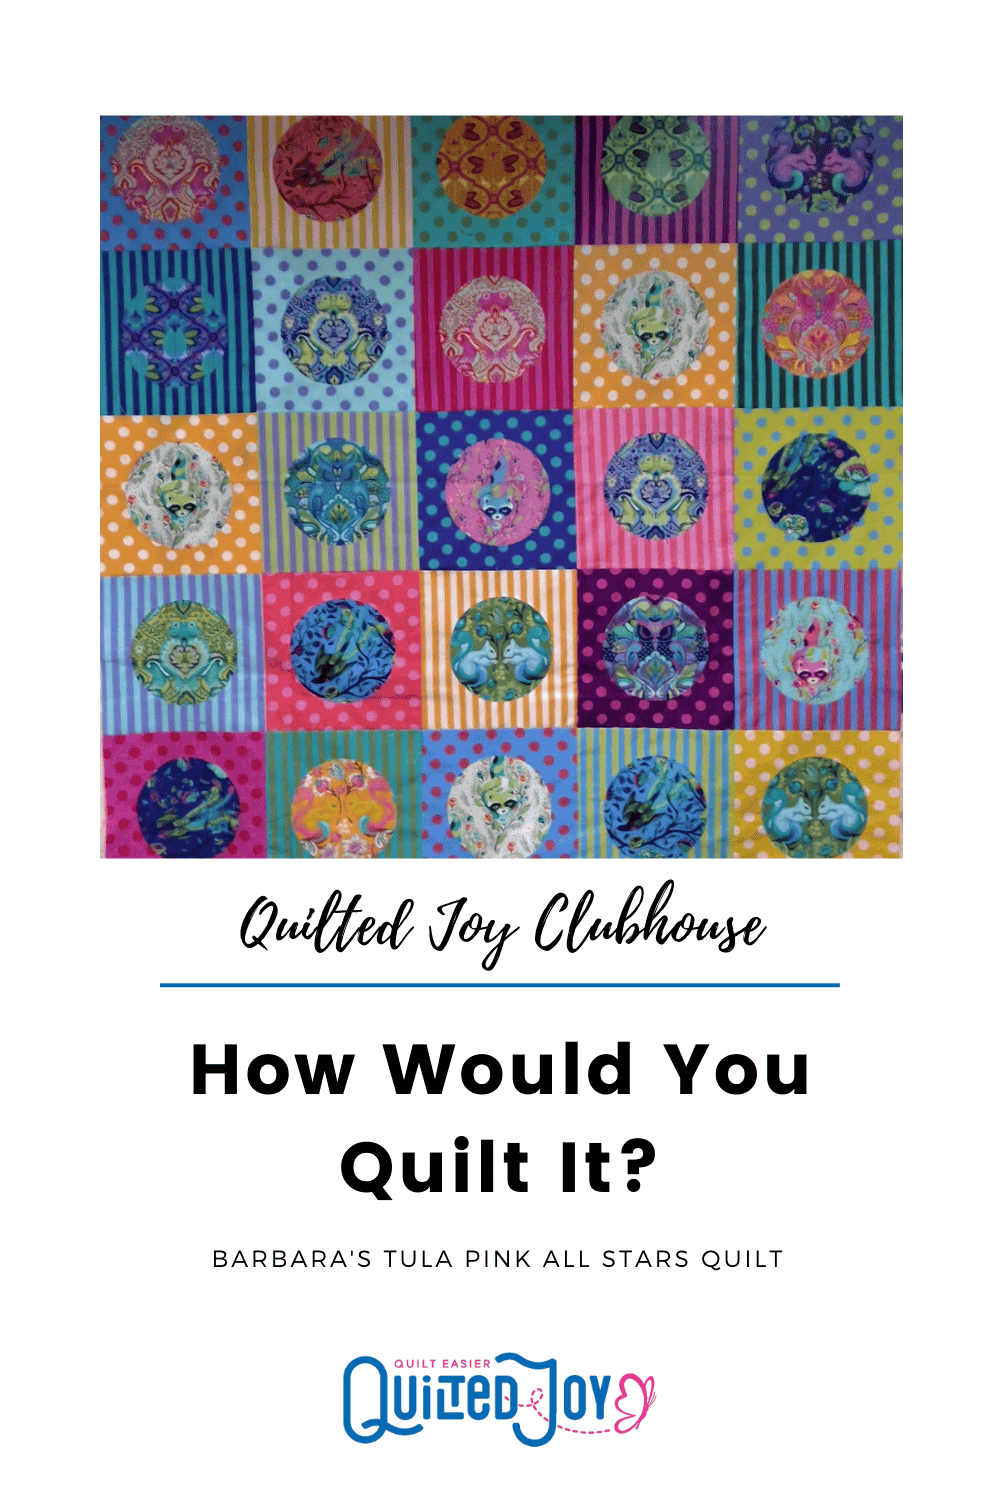 image of a colorful quilt using Tula Pink All Stars fabrics with text "Quilted Joy Clubhouse - How Would You Quilt It? Barbara's Tula Pink All Stars Quilt - Quilted Joy"